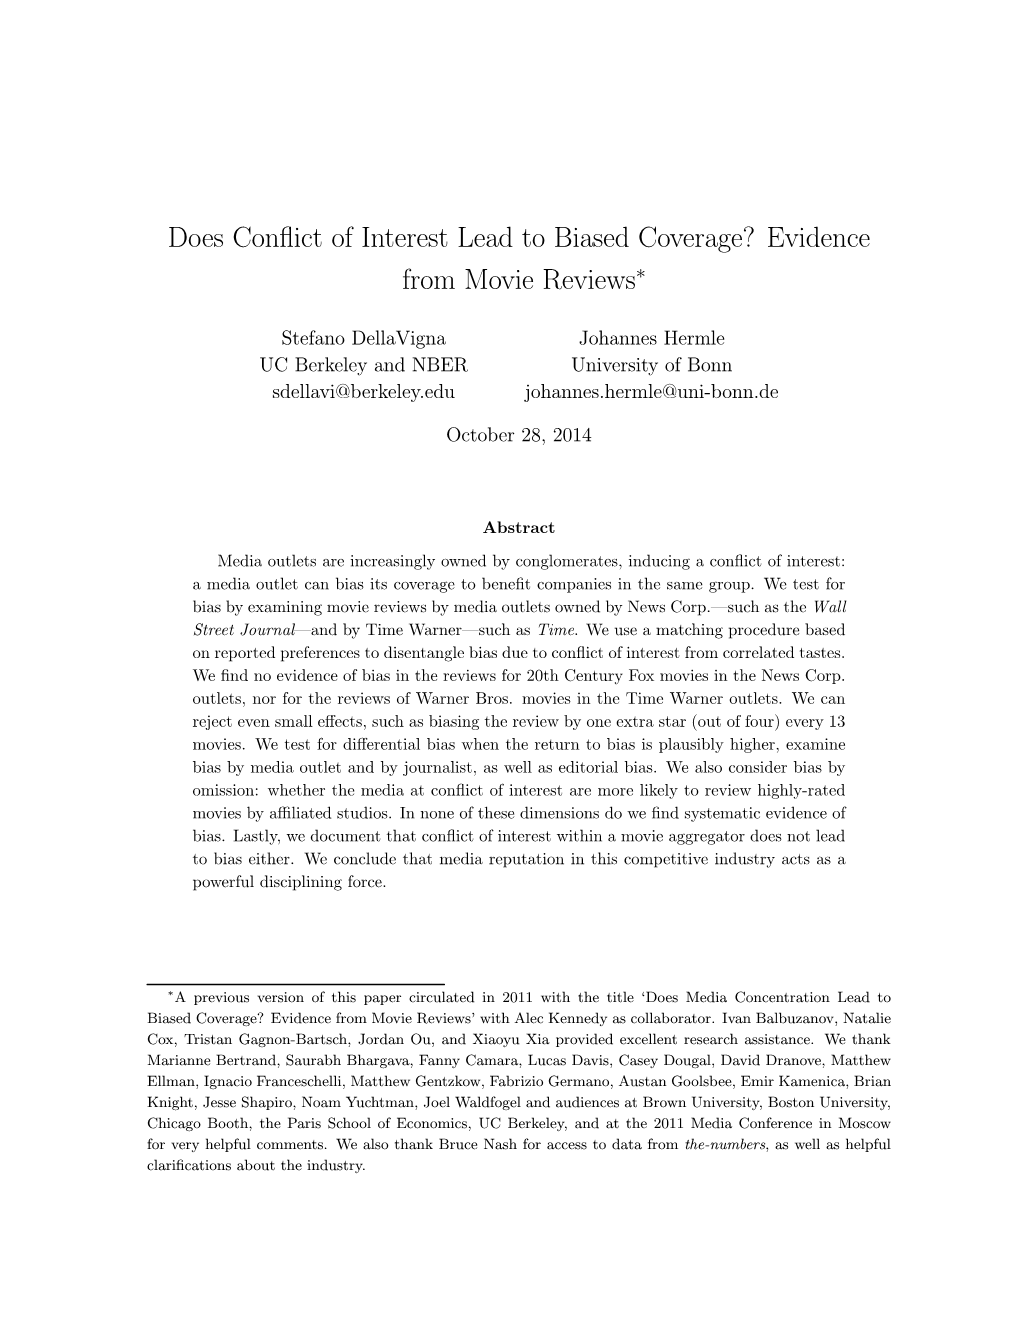 Does Conflict of Interest Lead to Biased Coverage? Evidence From